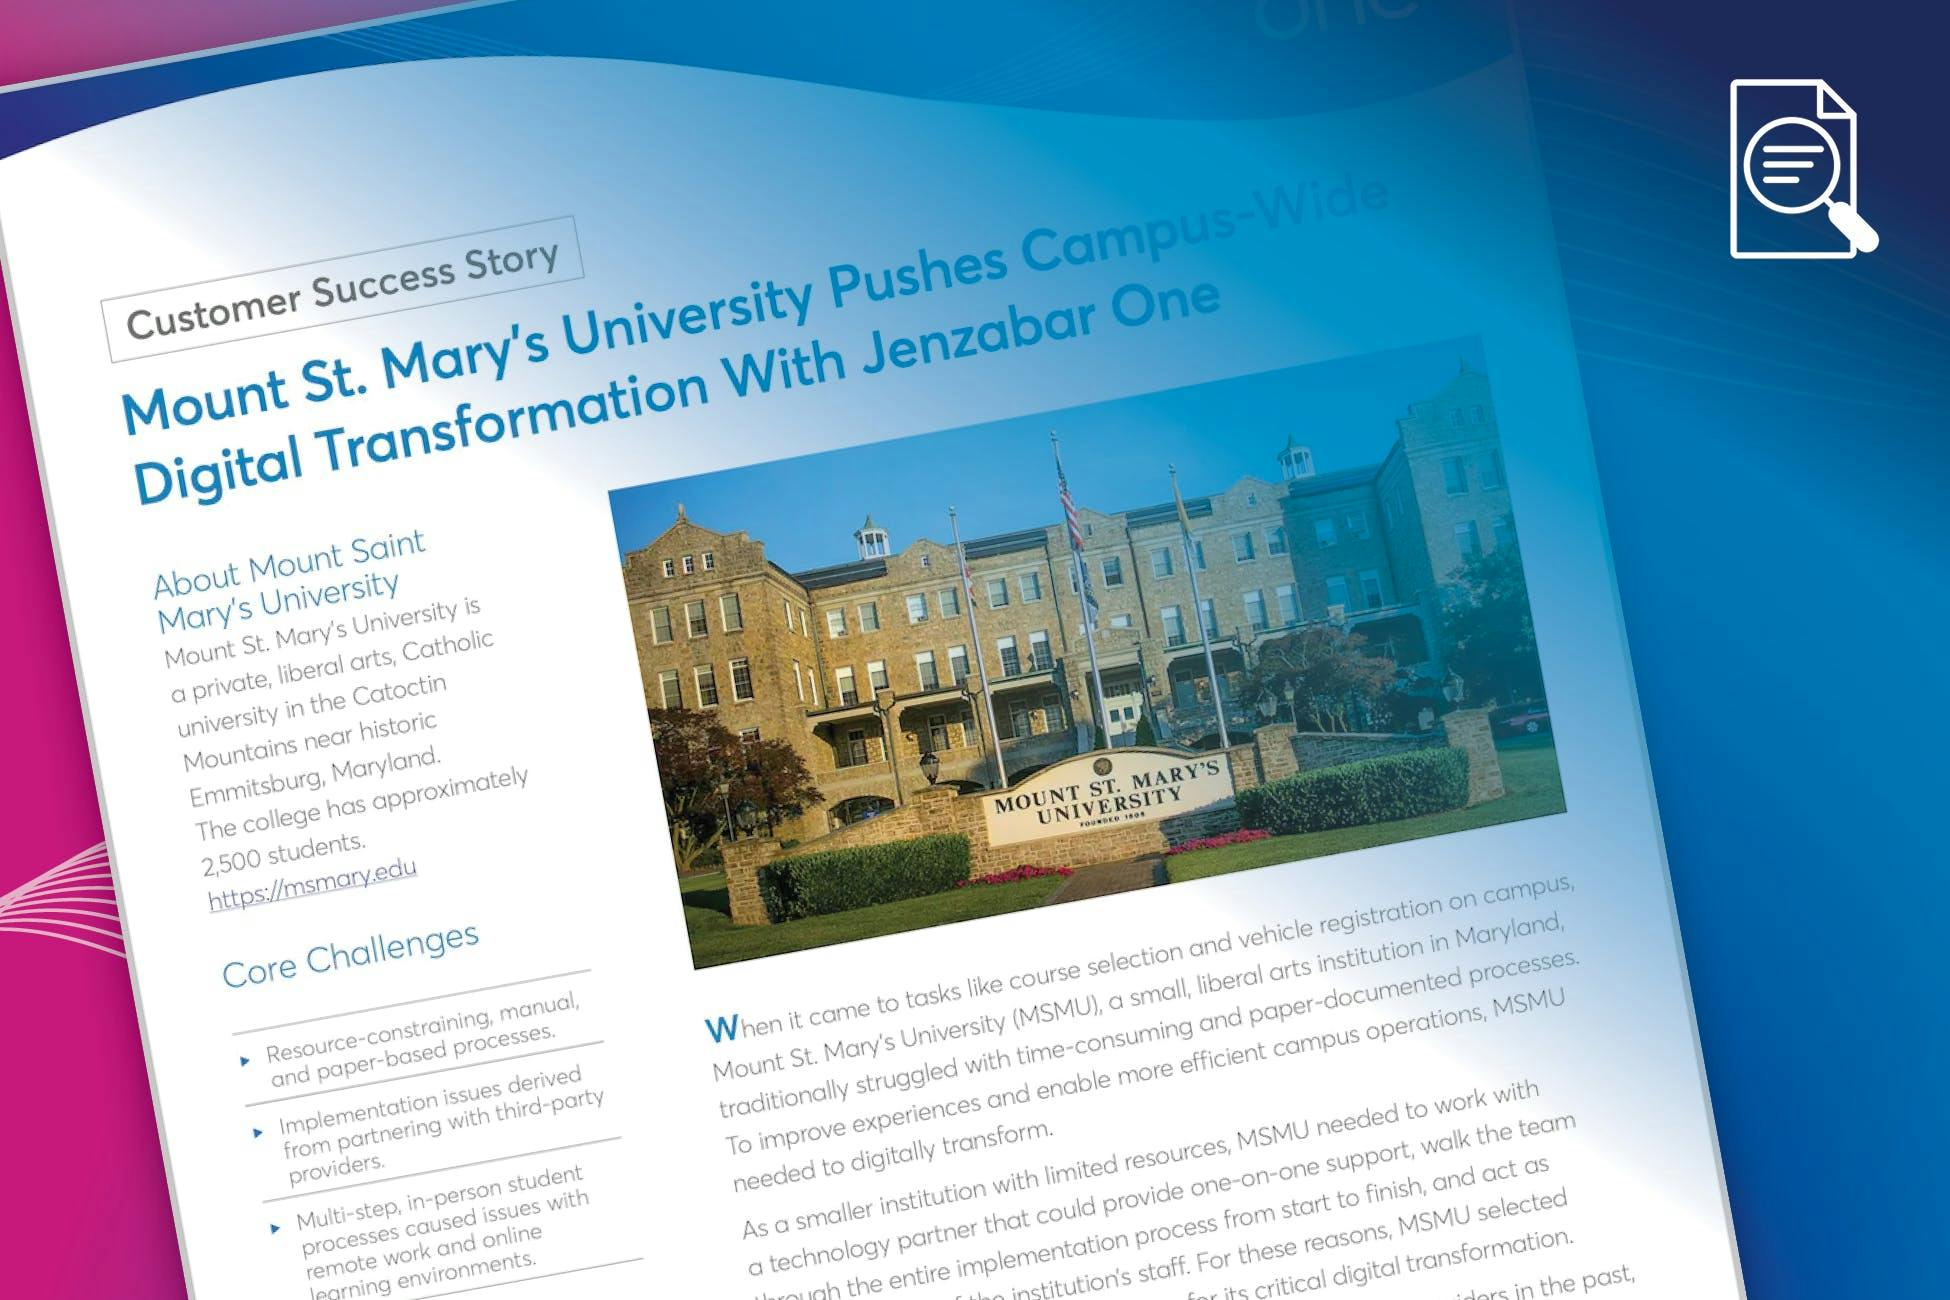 Success Story: Mount St. Mary’s University Pushes Campus-Wide Digital Transformation With Jenzabar One